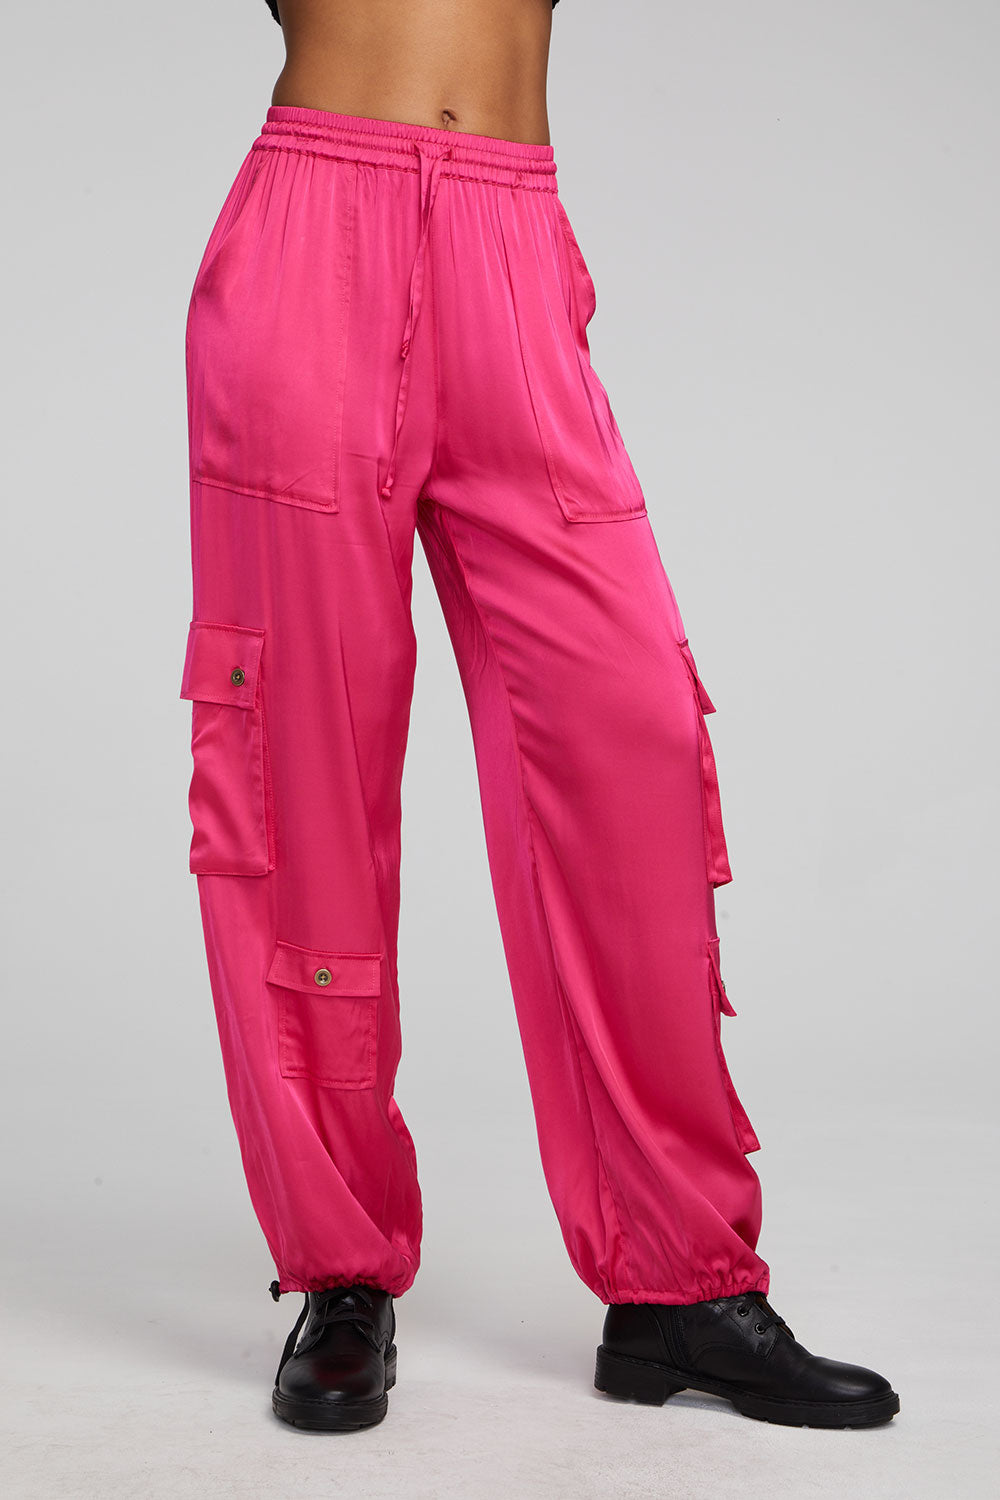 Billyy Trousers WOMENS chaserbrand